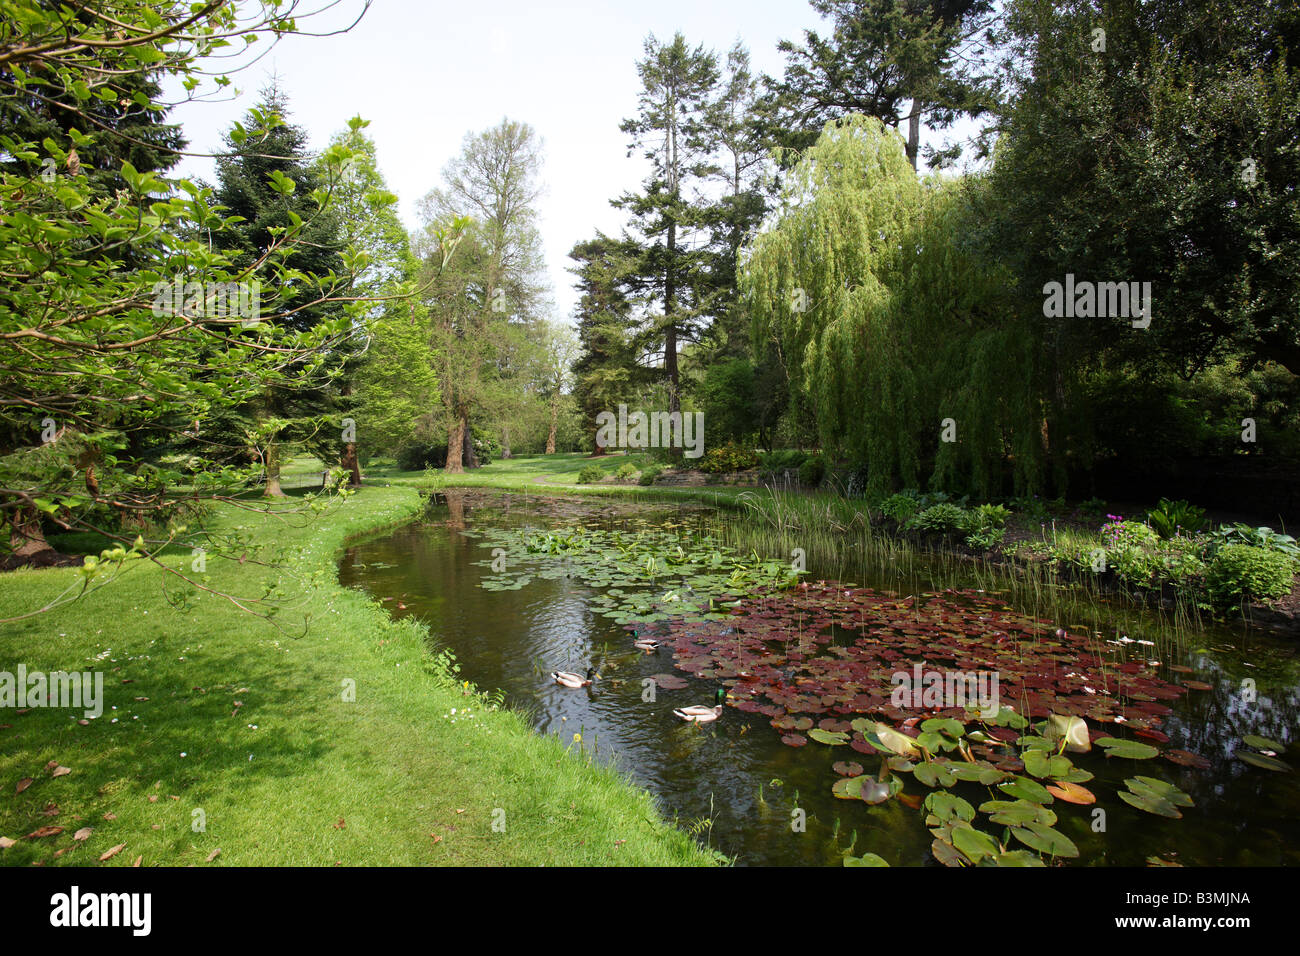 Ducks in a lily pond at the Botanic Gardens Dublin Stock Photo